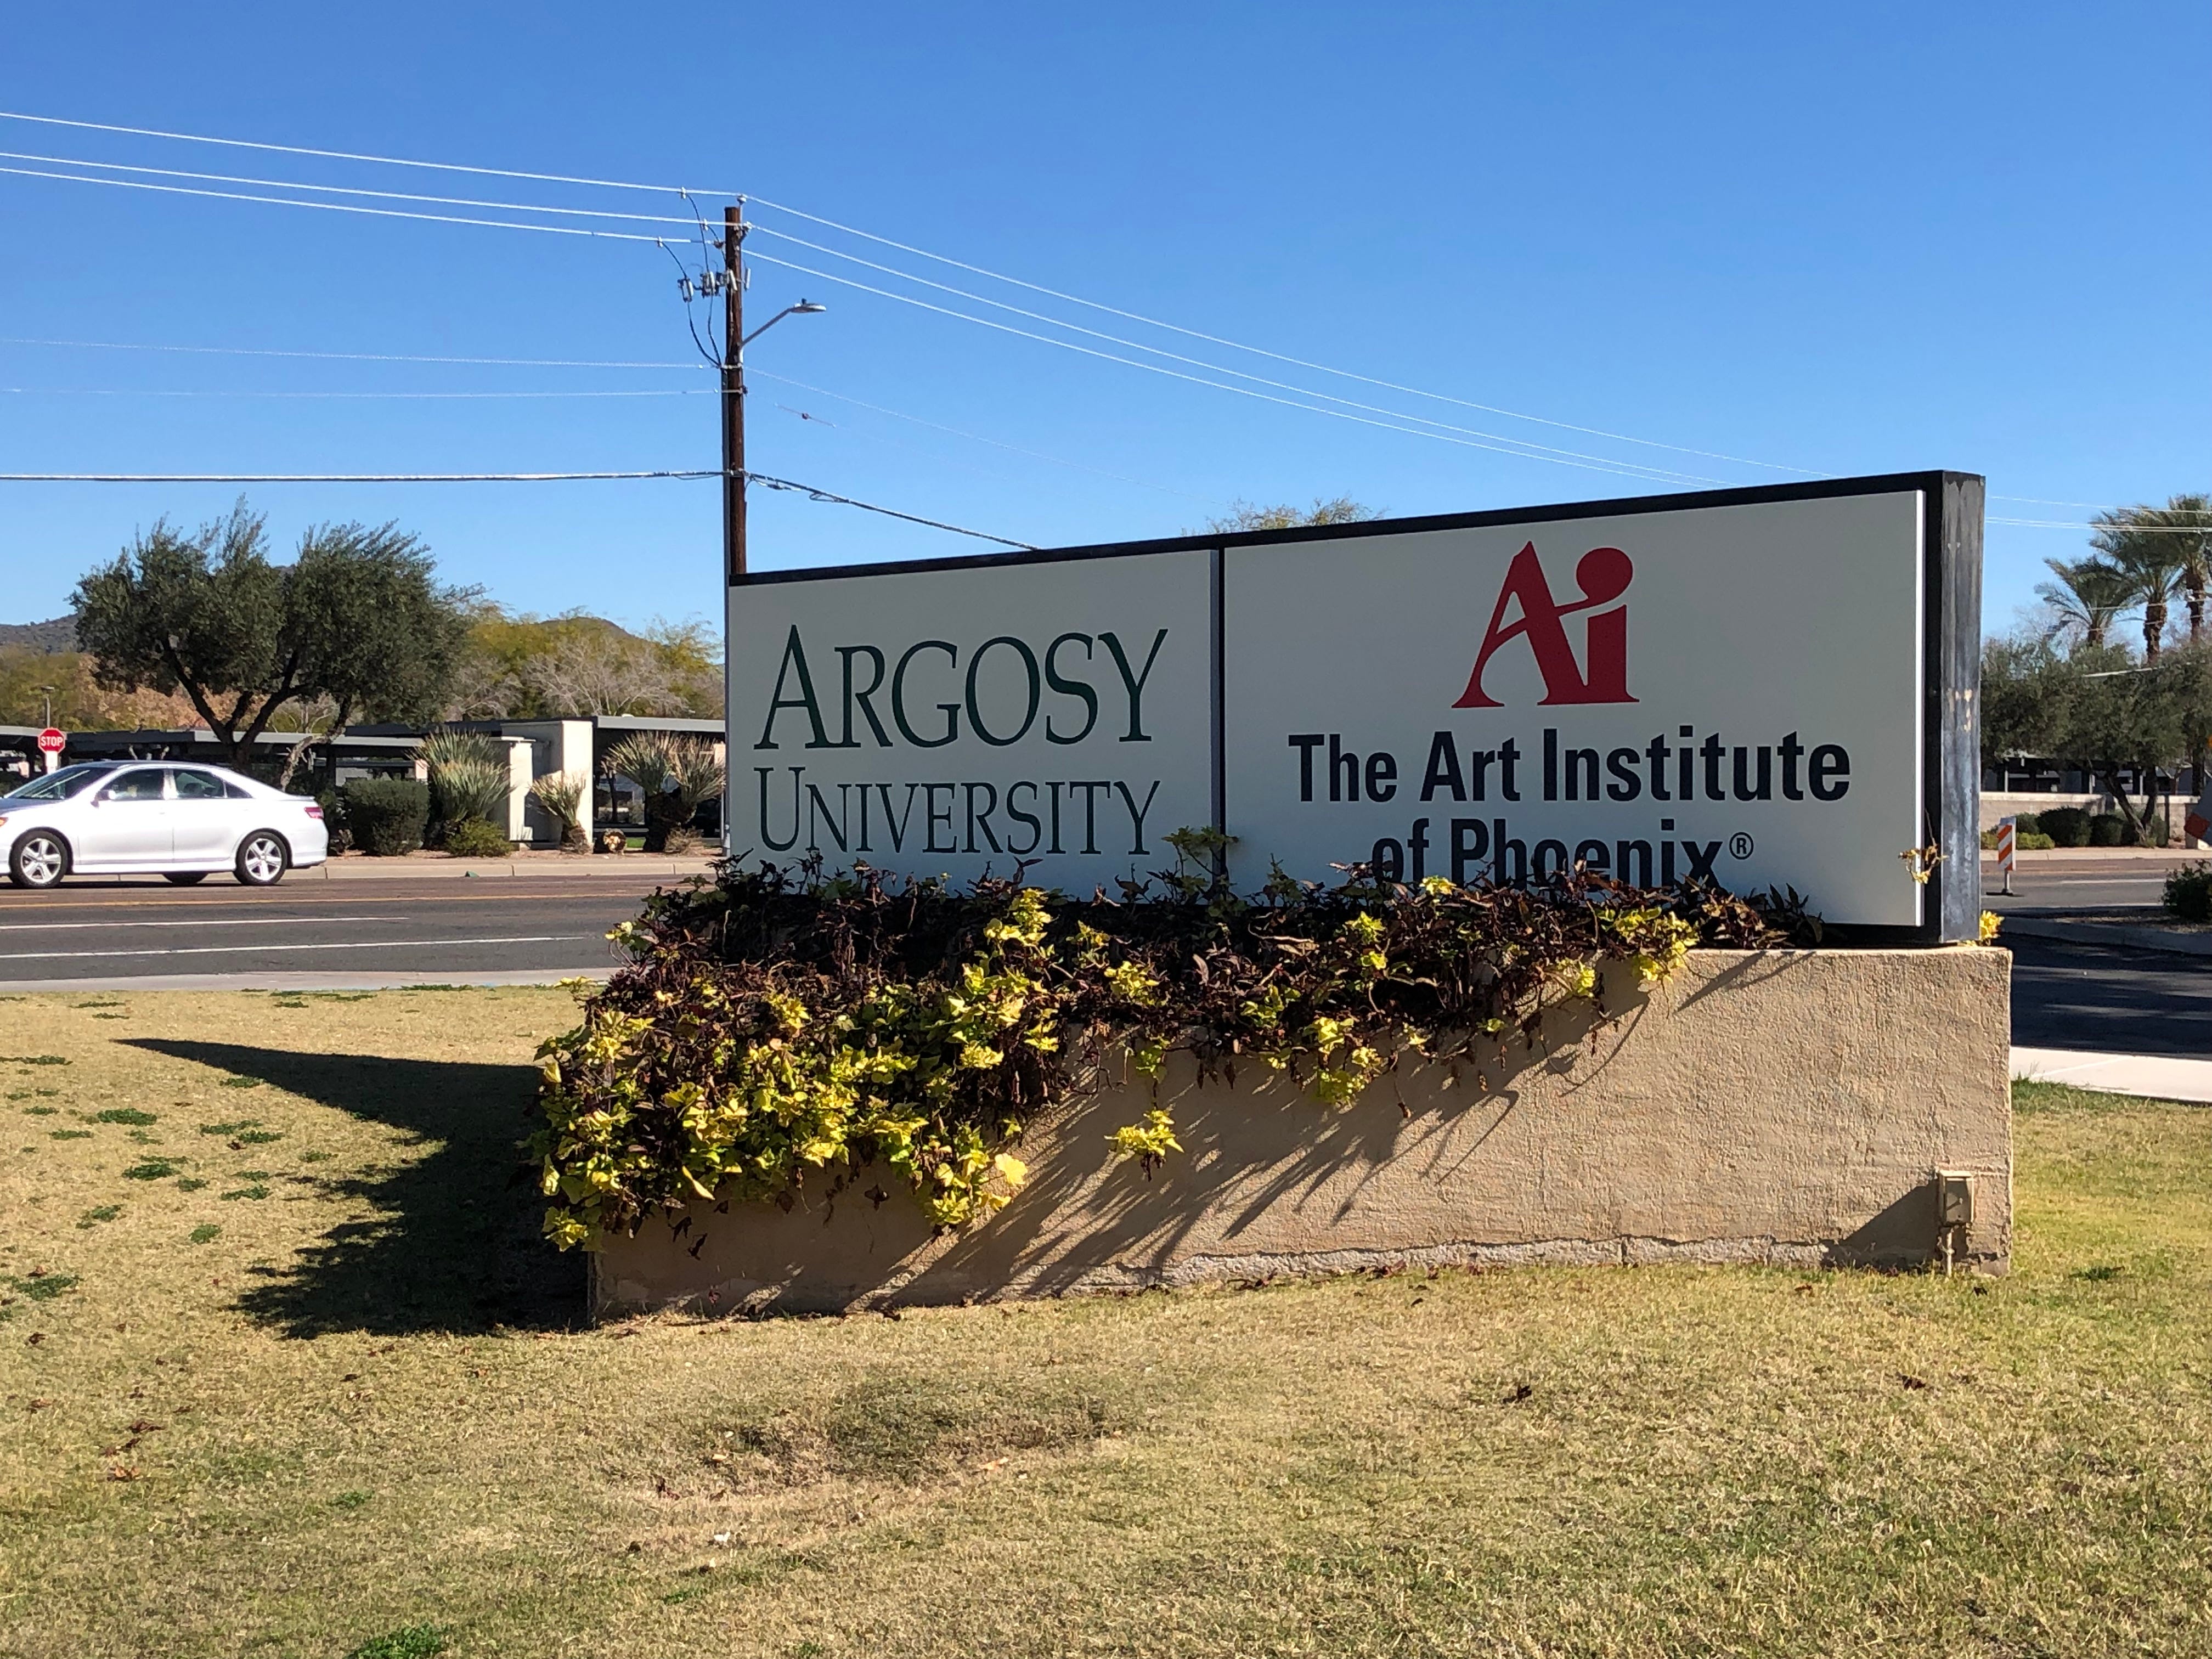 Argosy University could lose all federal financial aid, U.S. Dept. of Education warns